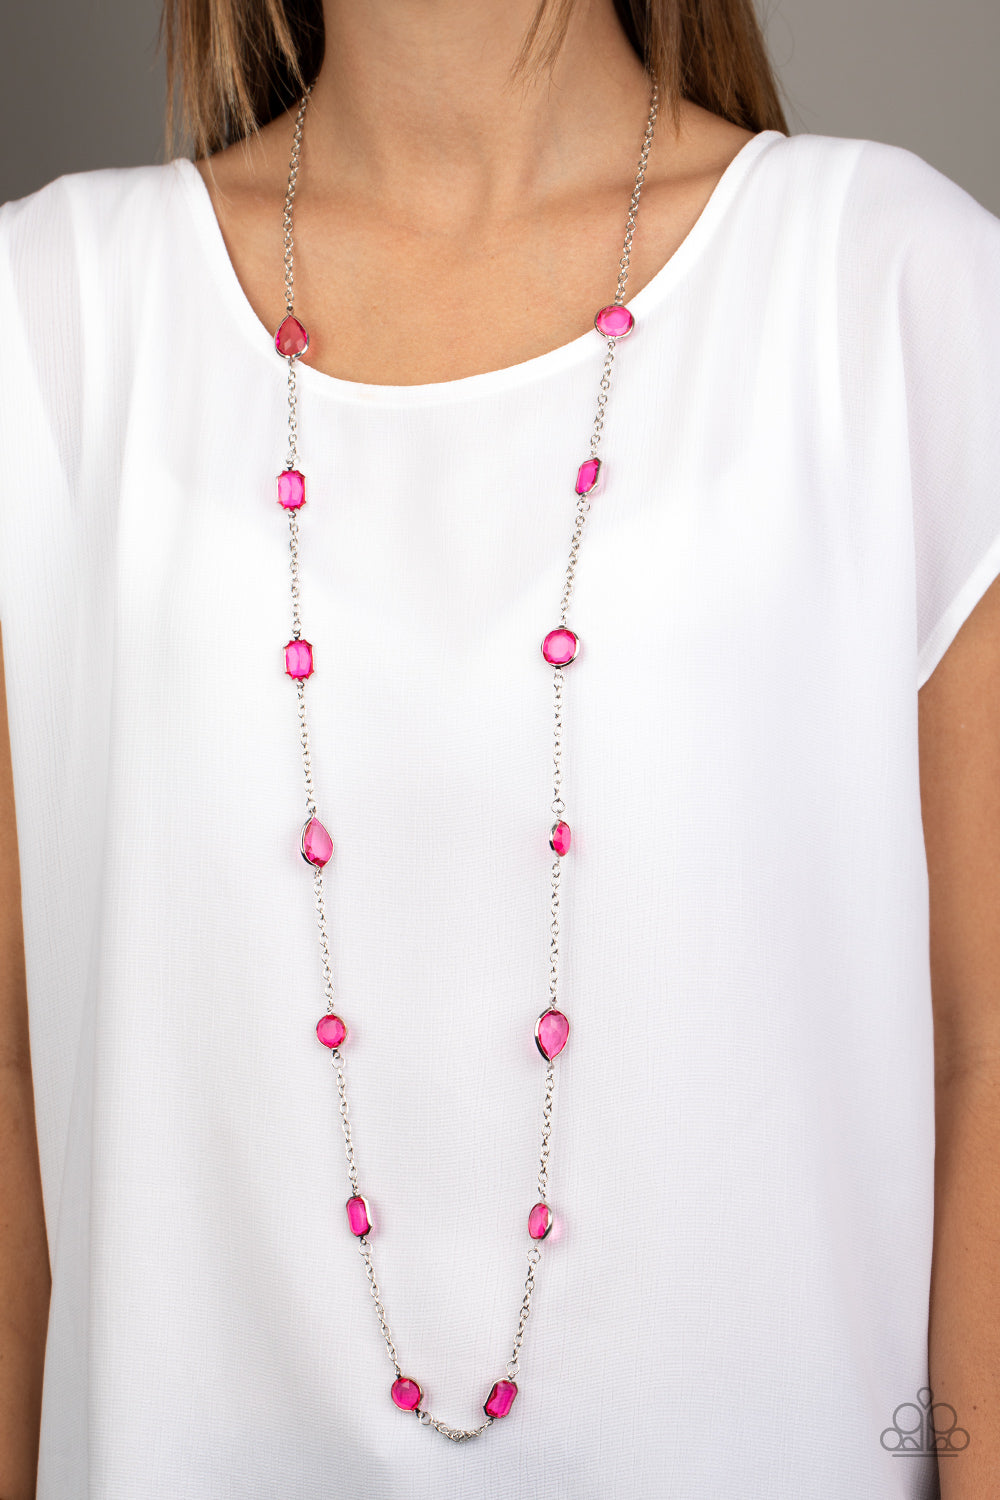 Glassy Glamorous - Pink Necklace Paparazzi Accessories